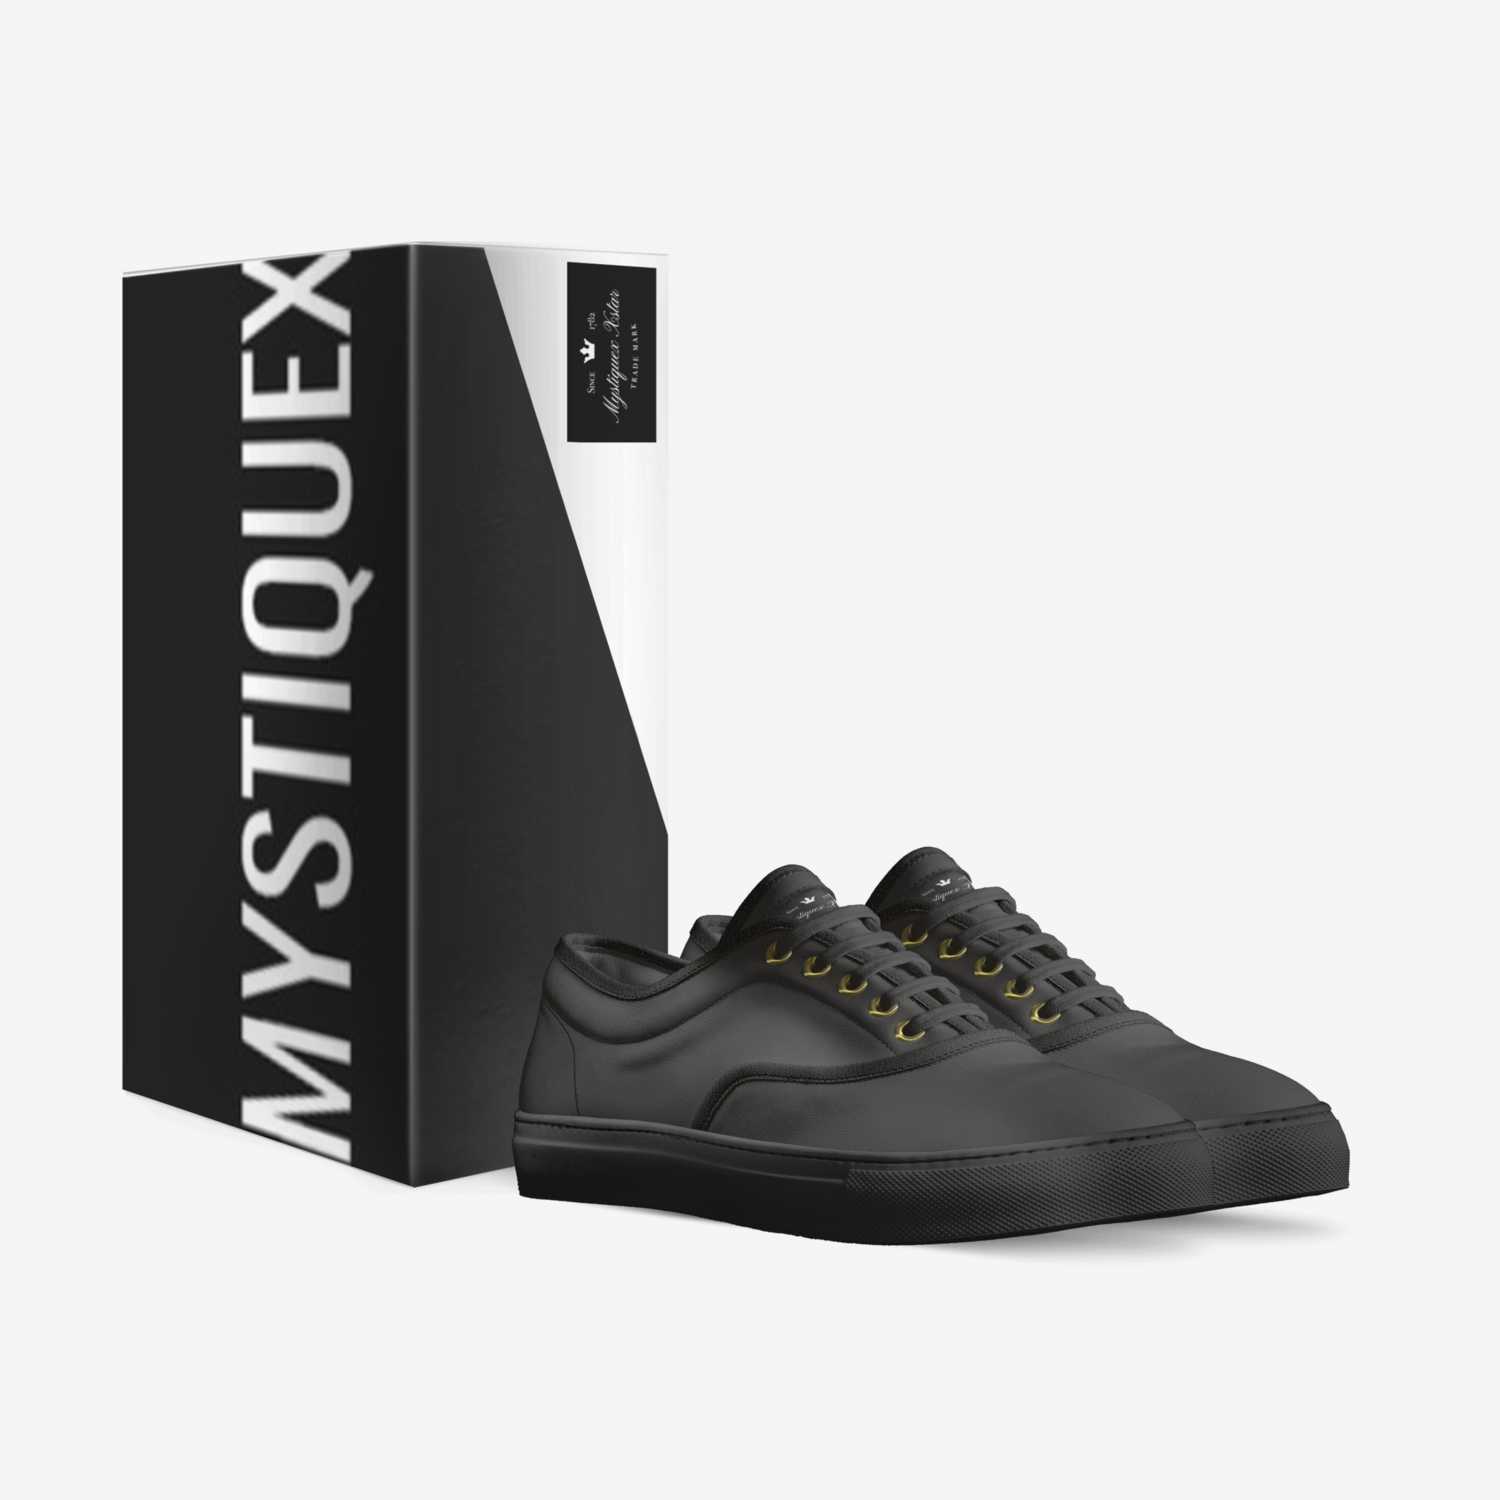 Mystiquex Xstar custom made in Italy shoes by Arely Ghigliotty | Box view